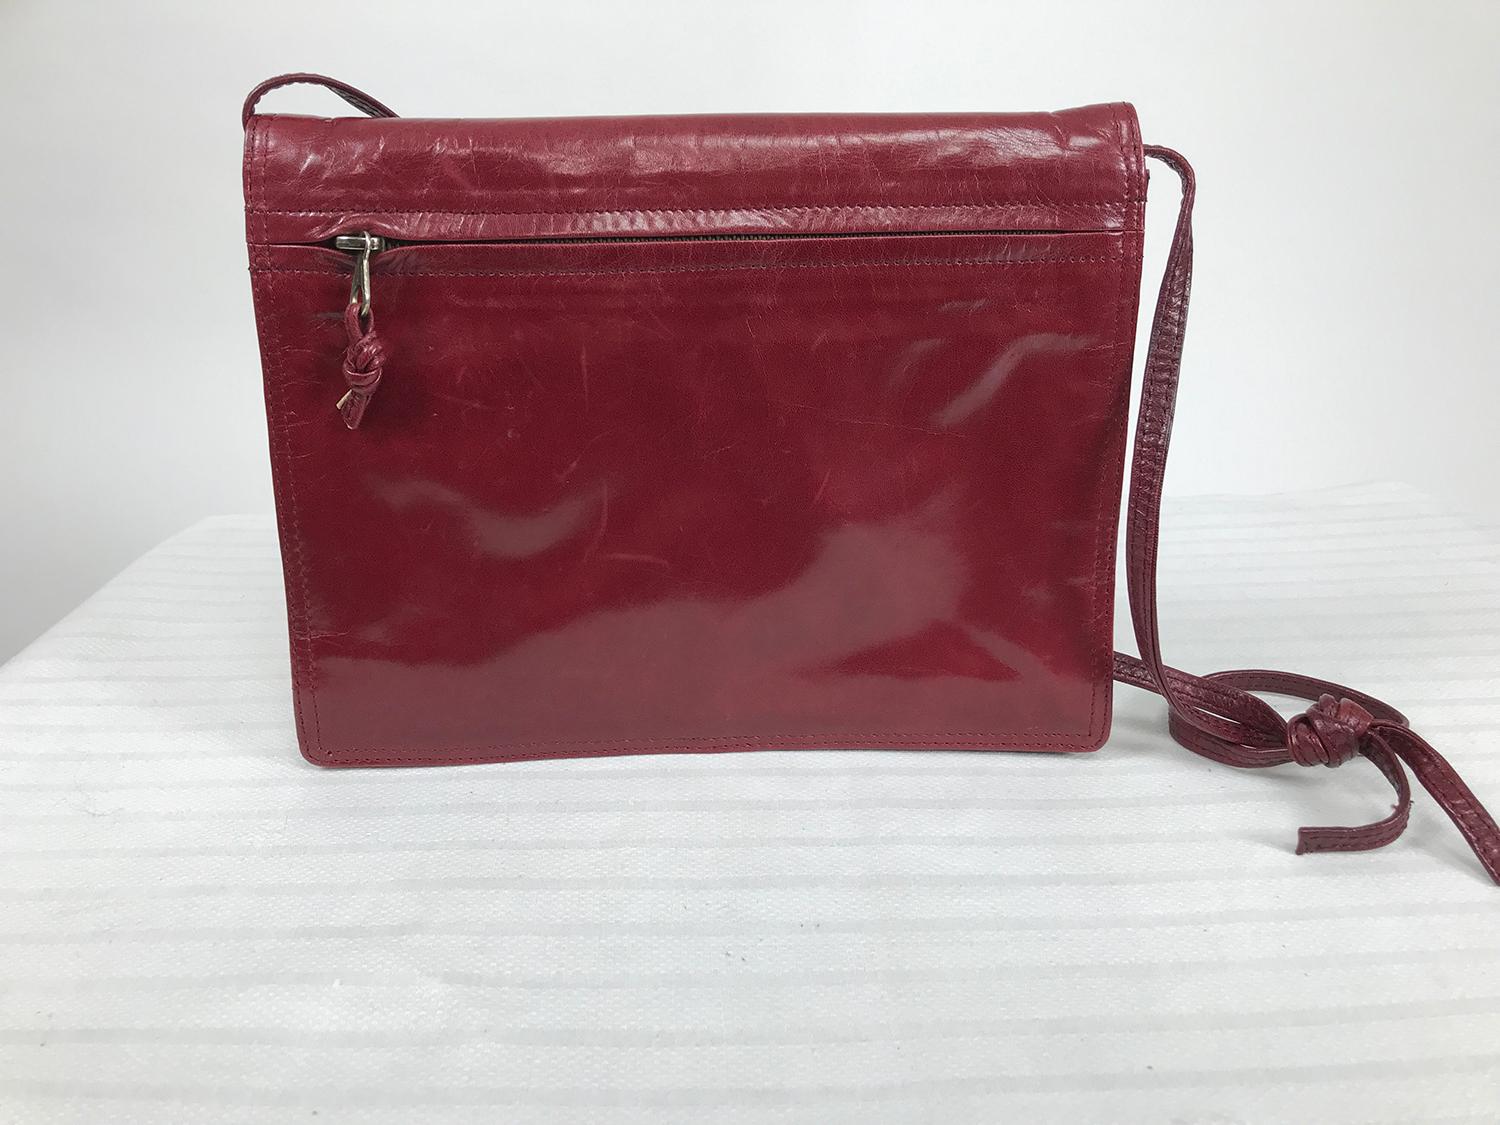 Vintage Bottega Veneta soft burgunday glazed leather envelope shoulder or clutch bag from the 1970s. Envelope bag with gusseted sides will expand to hold more than expected. The bag closes at the front with a hidden snap beneath the faux slip tab.